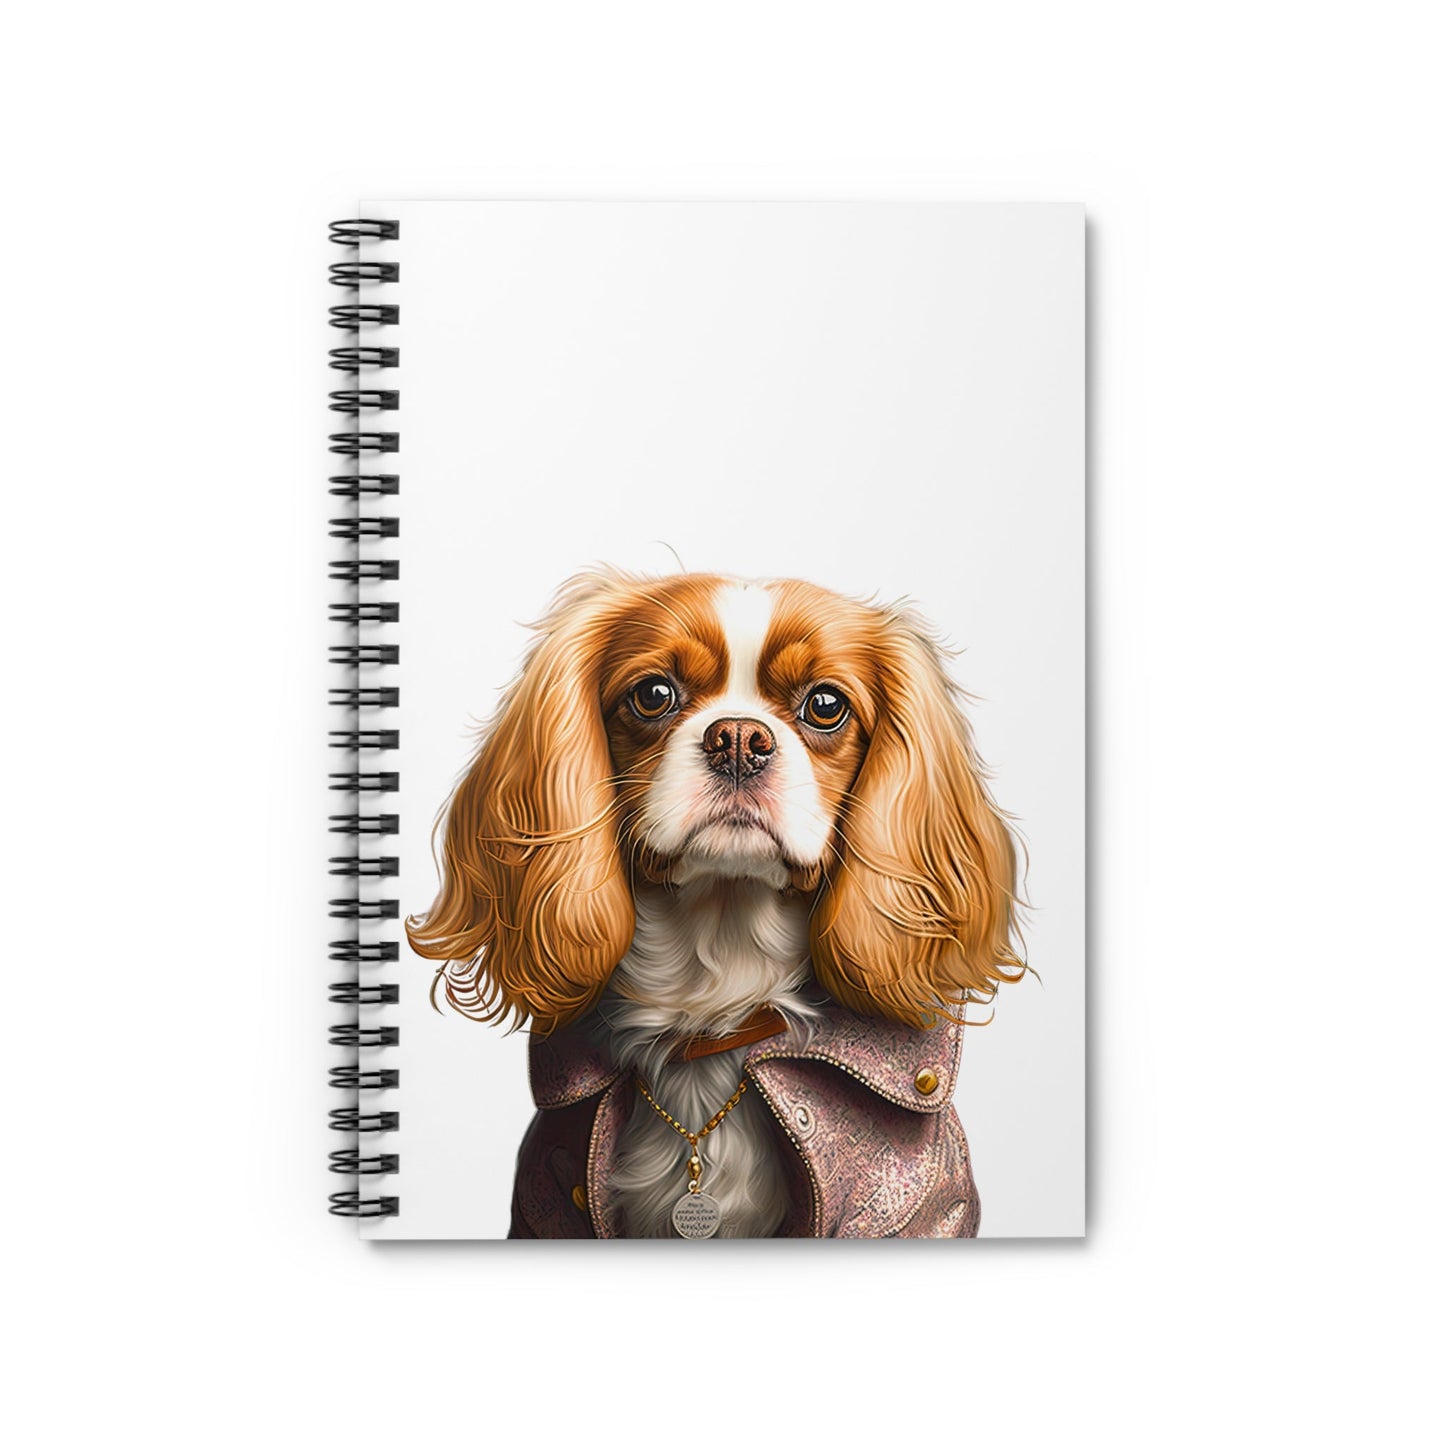 CATHERINE : Spiral Notebook - Ruled Line - Shaggy Chic